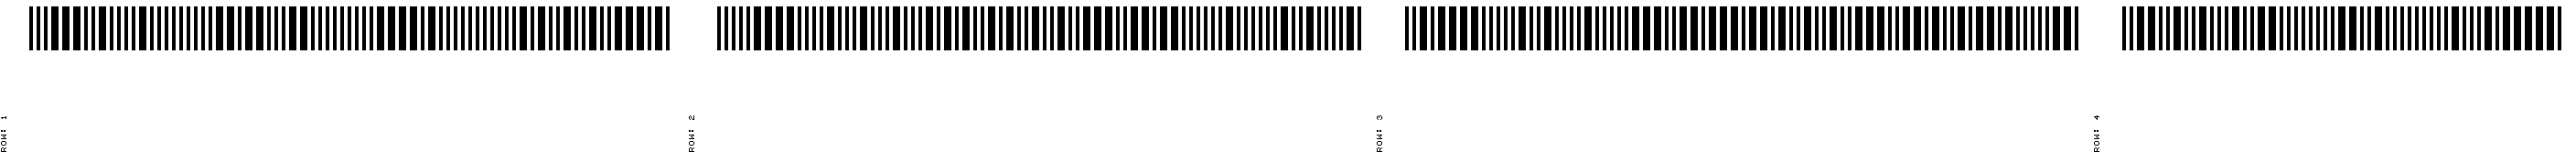 -- Bar Code produced with PRBC from Plotter ROM -- (image source 'BC.png' is missing)